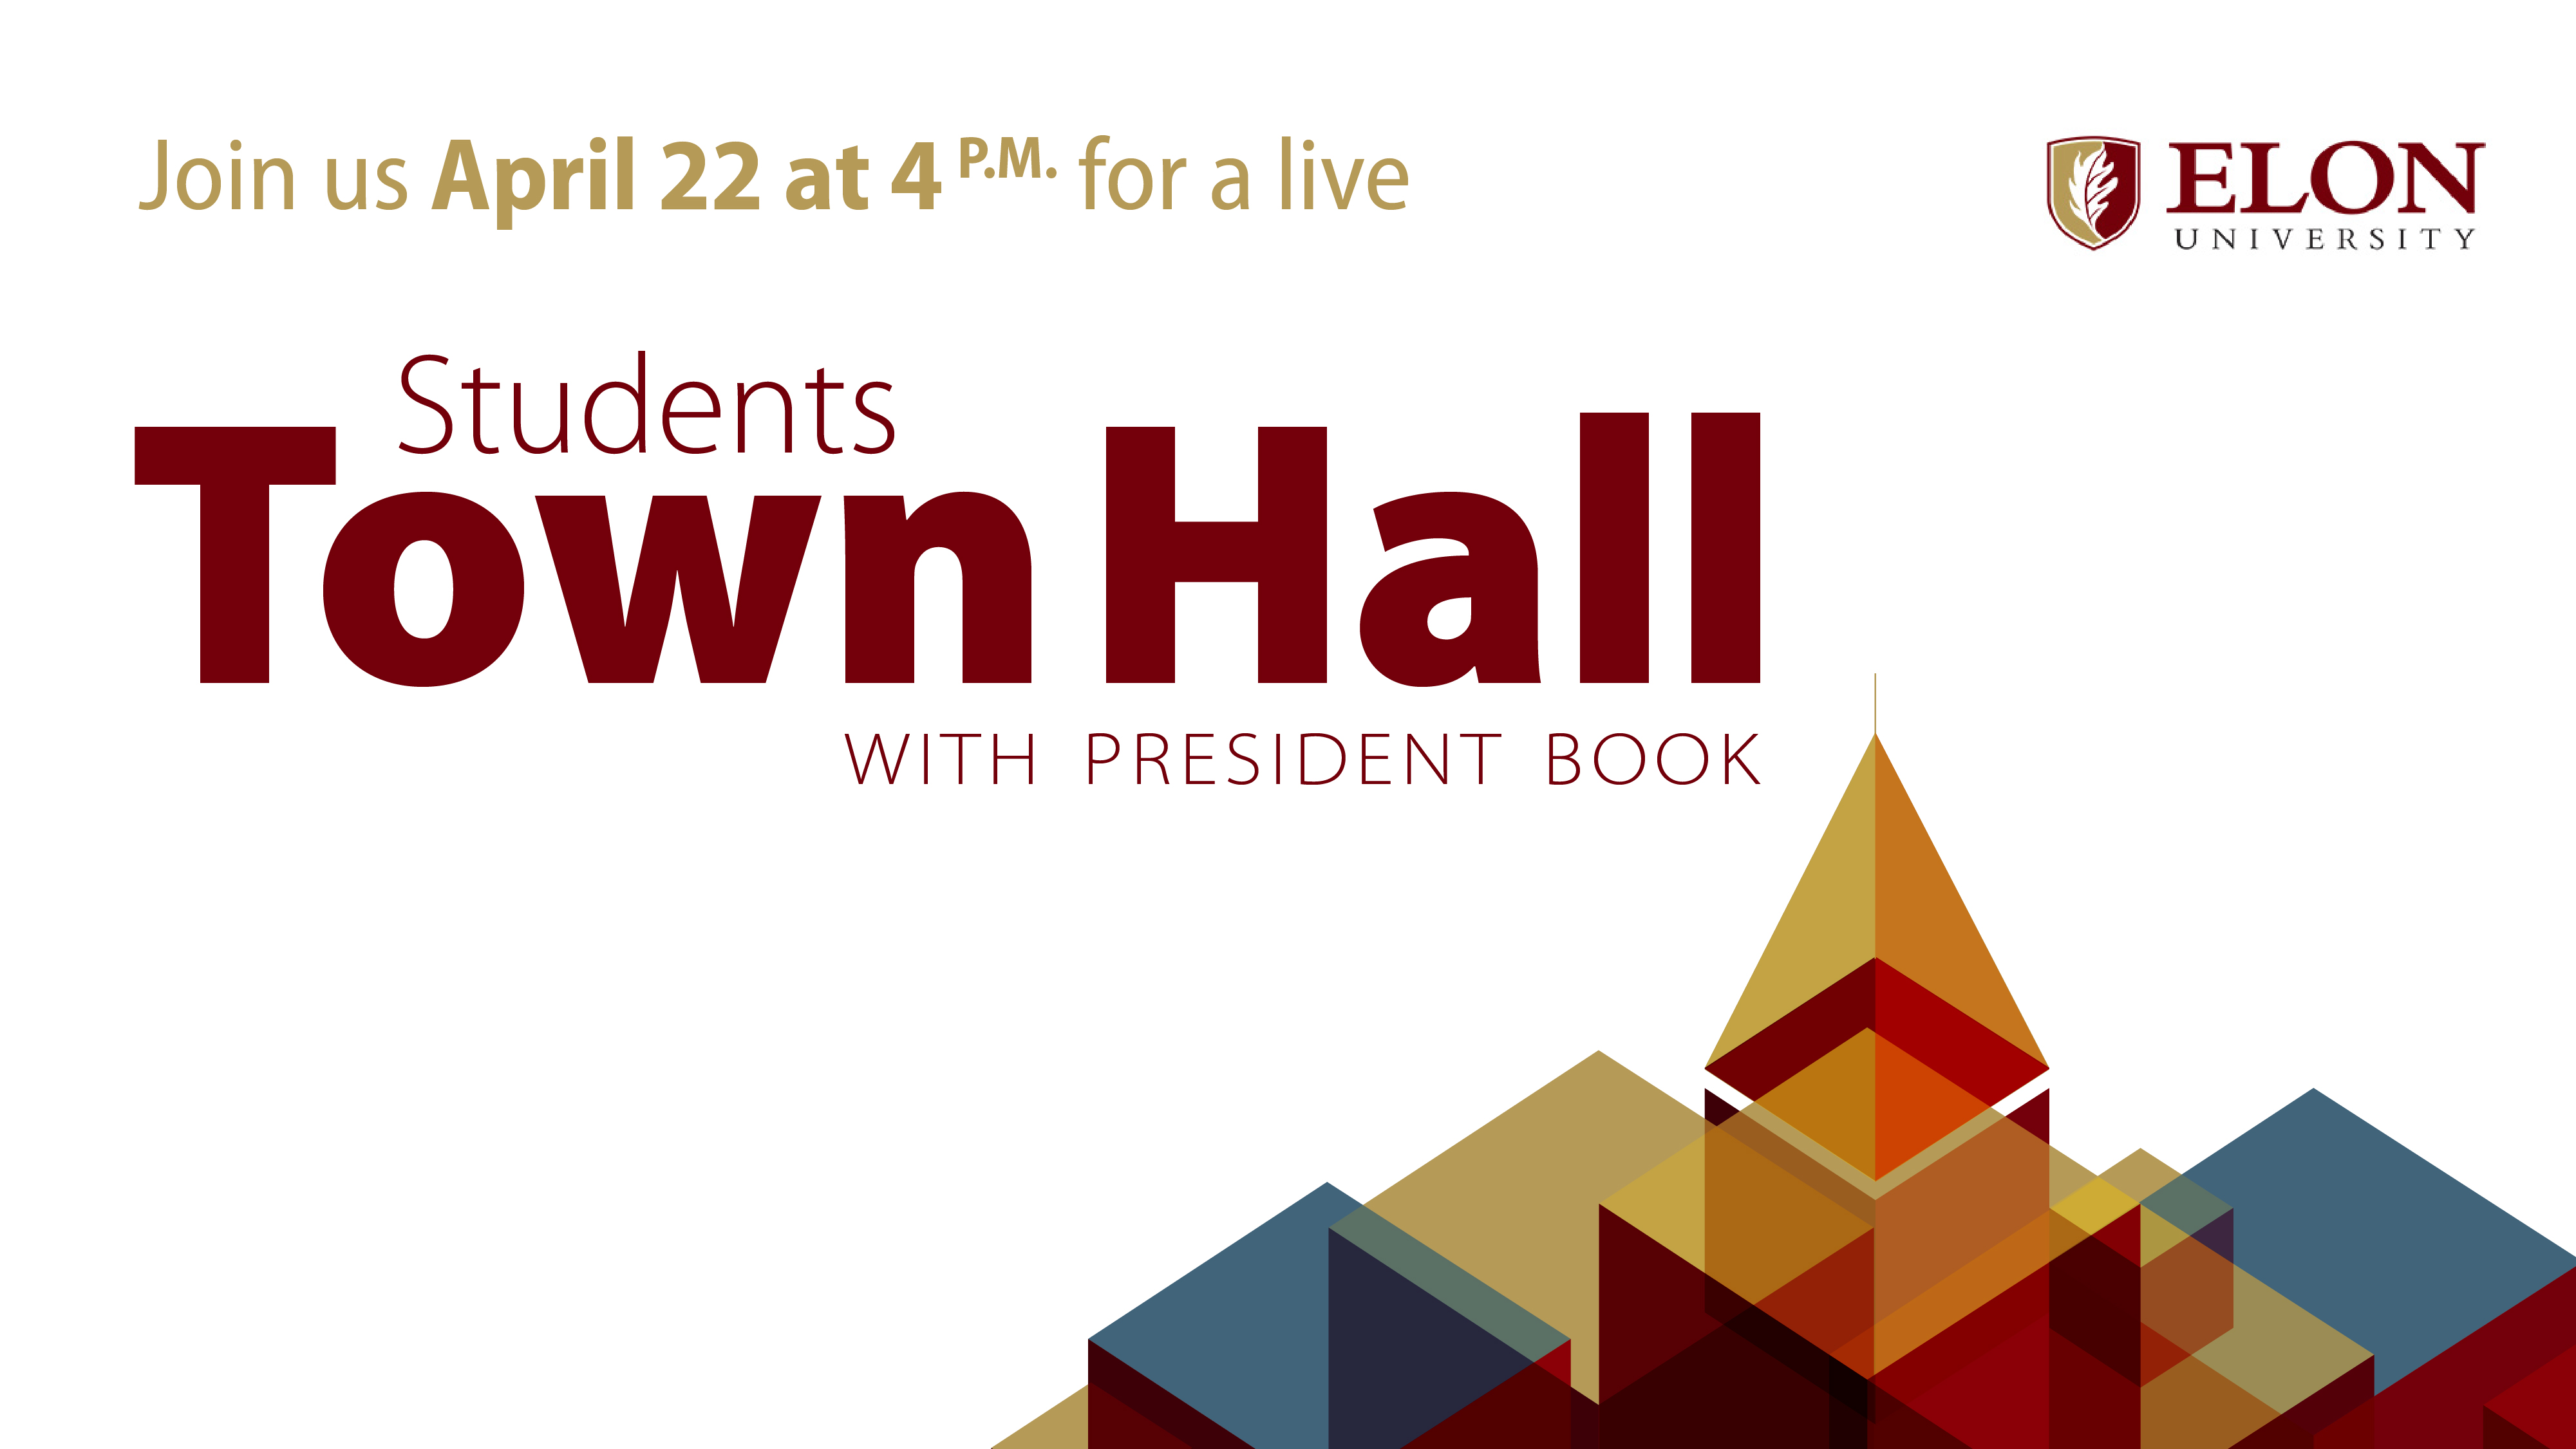 Student Town Hall Forum graphic